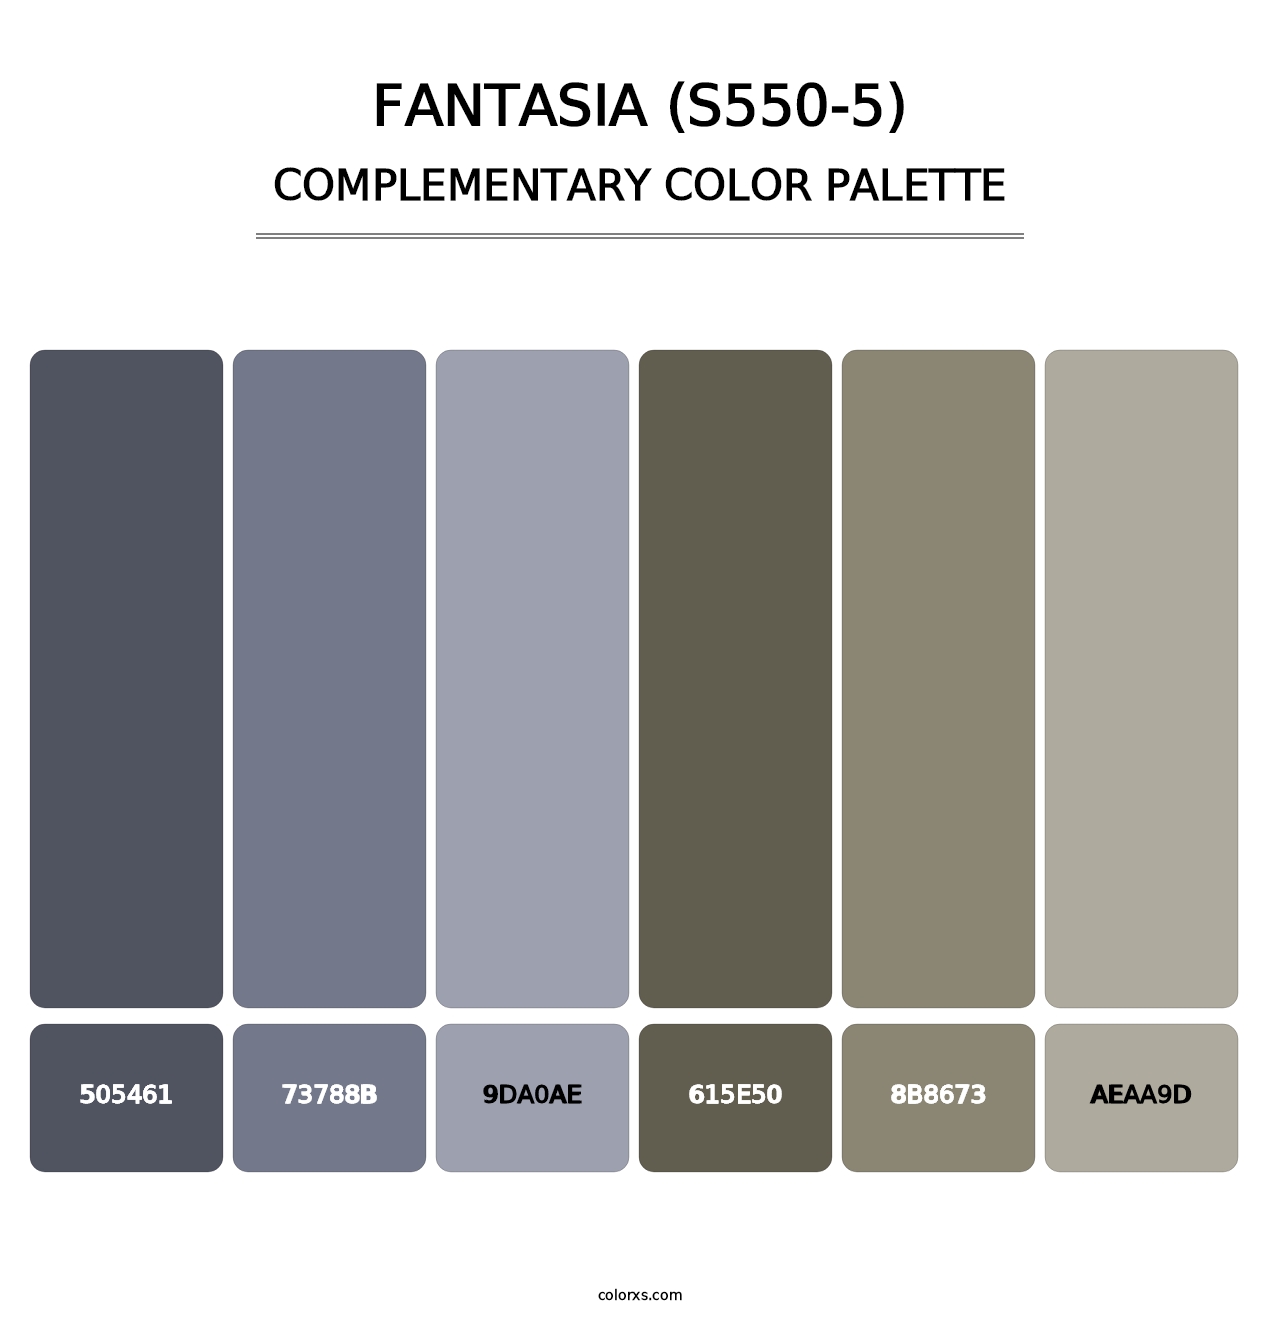 Fantasia (S550-5) - Complementary Color Palette